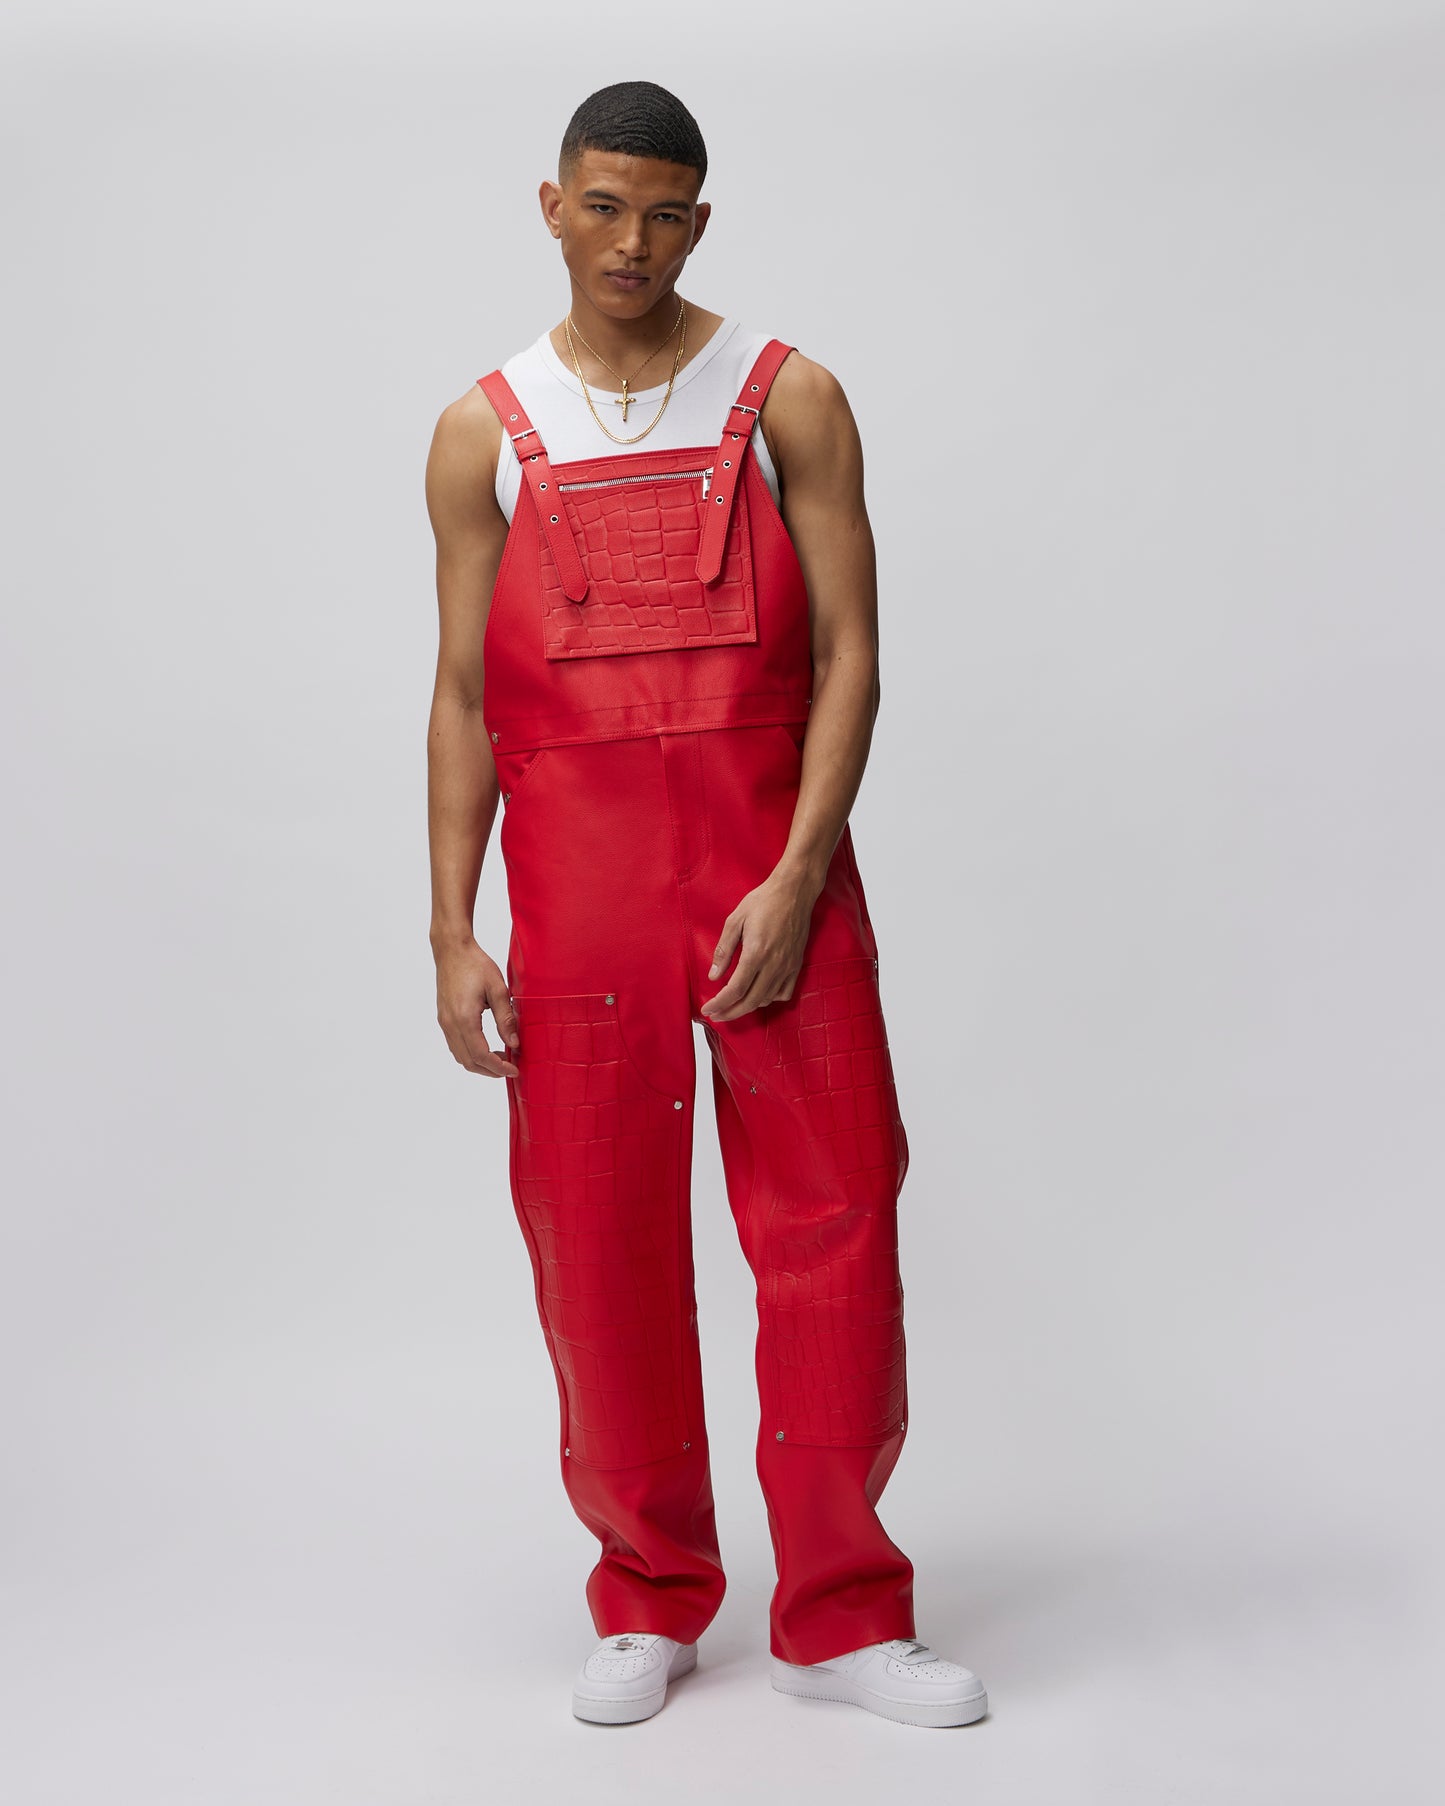 LEATHER DUNGAREE - Due Diligence Apparel